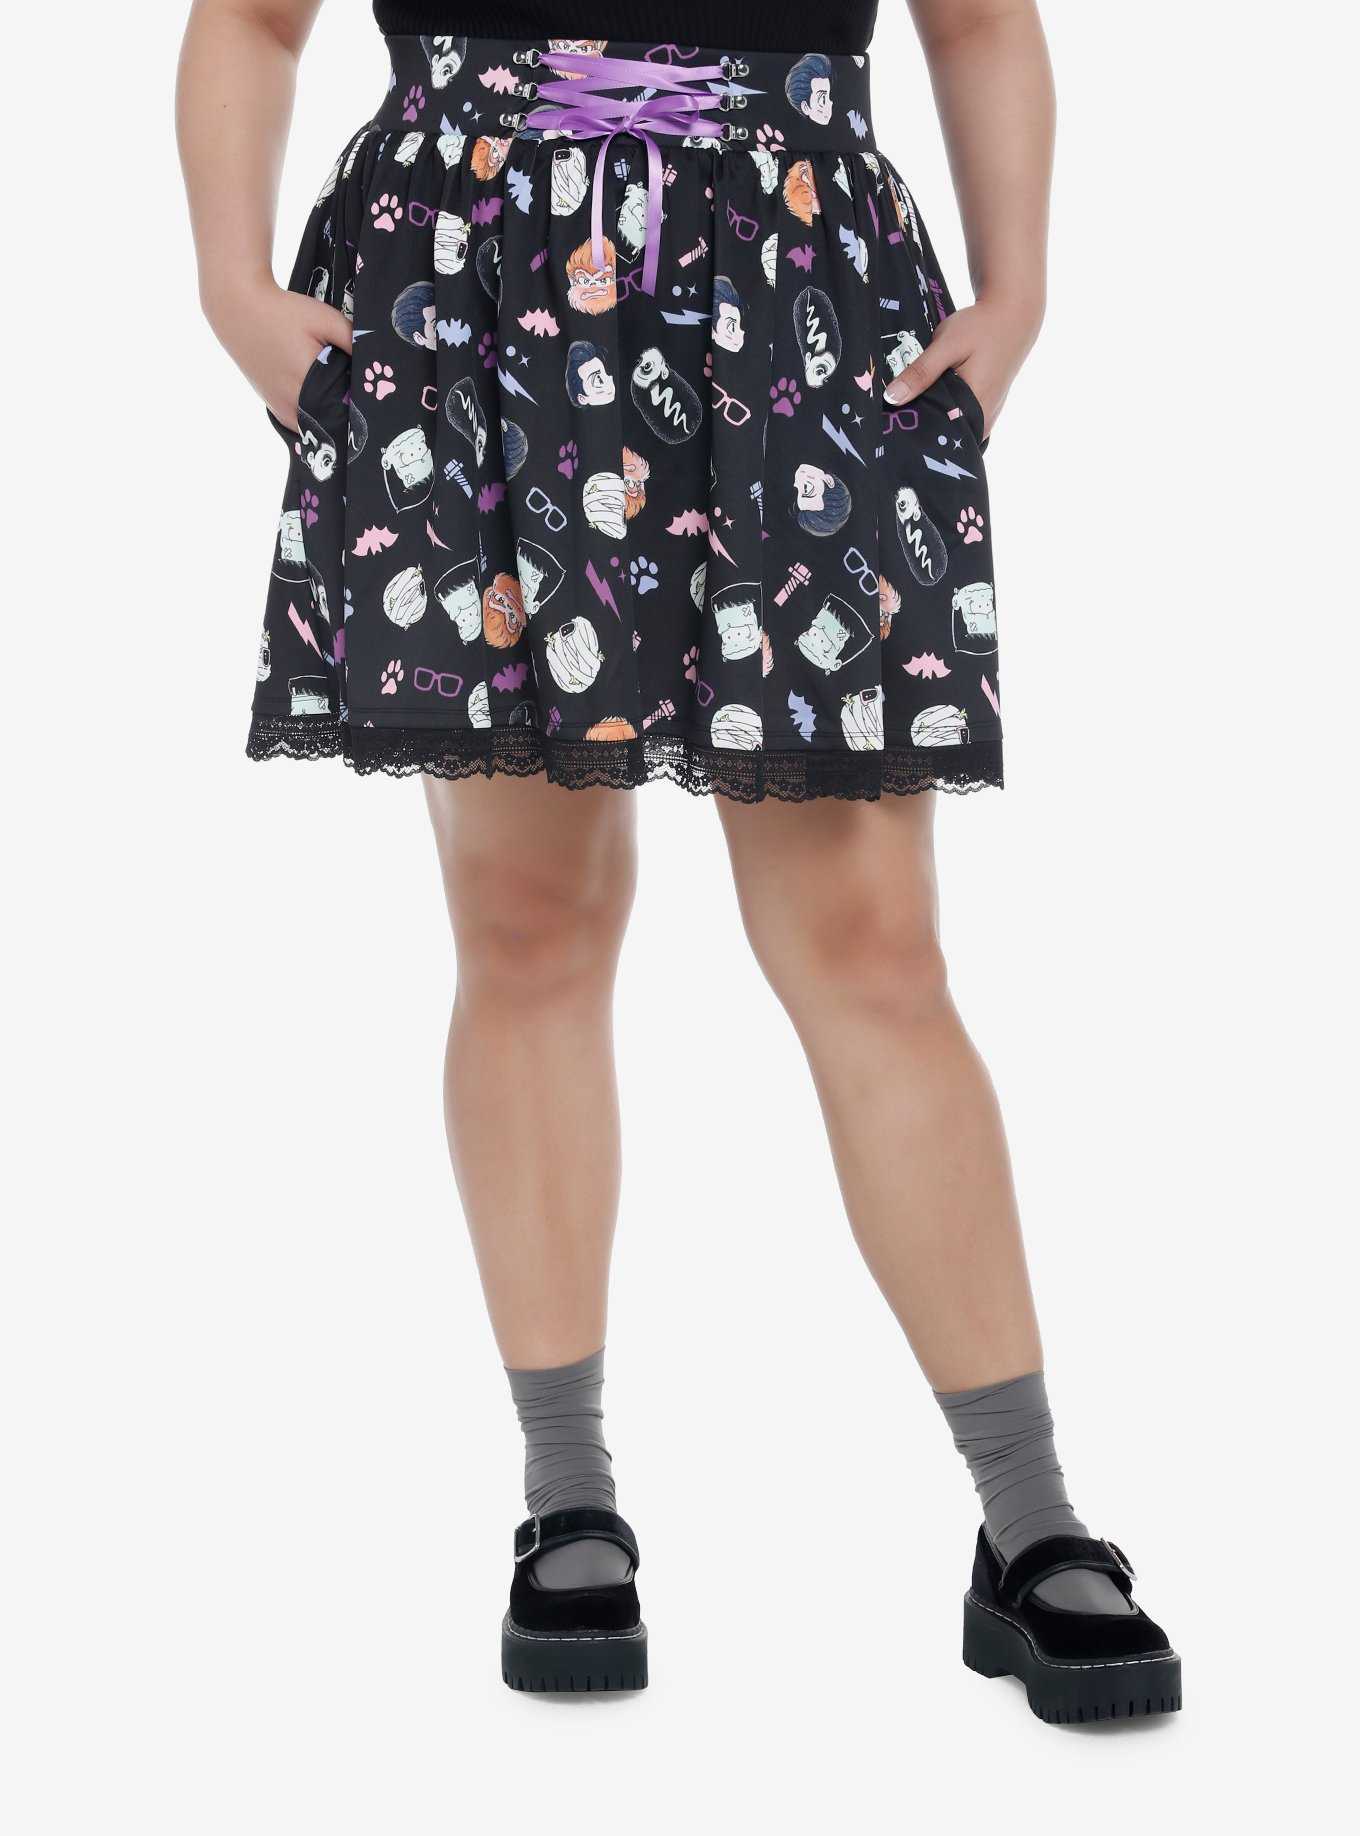 Universal Monsters Chibi Lace-Up Skirt Plus Size, , hi-res